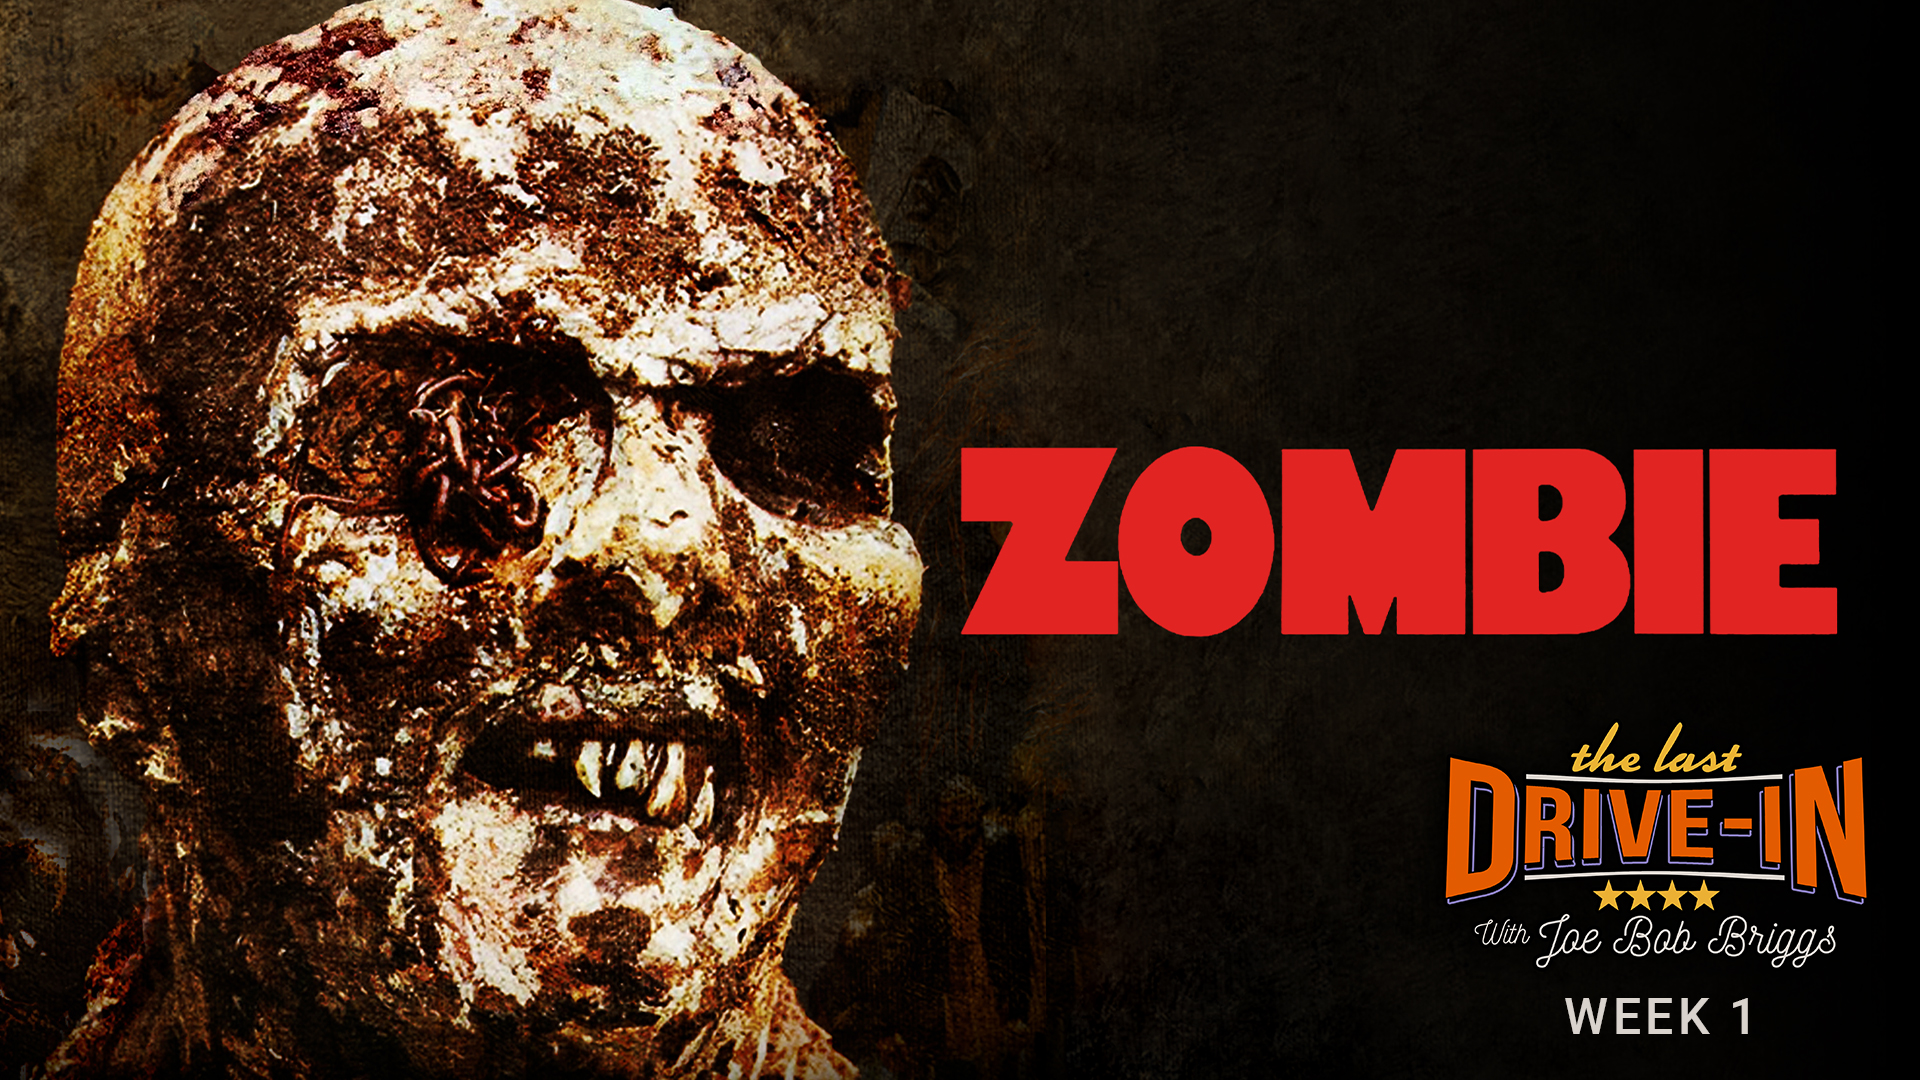 Week 1: Zombie, Lucio Fulci's masterpiece is a must-see for zombie cinema., TV-MA, Season 1062609, Episode 1